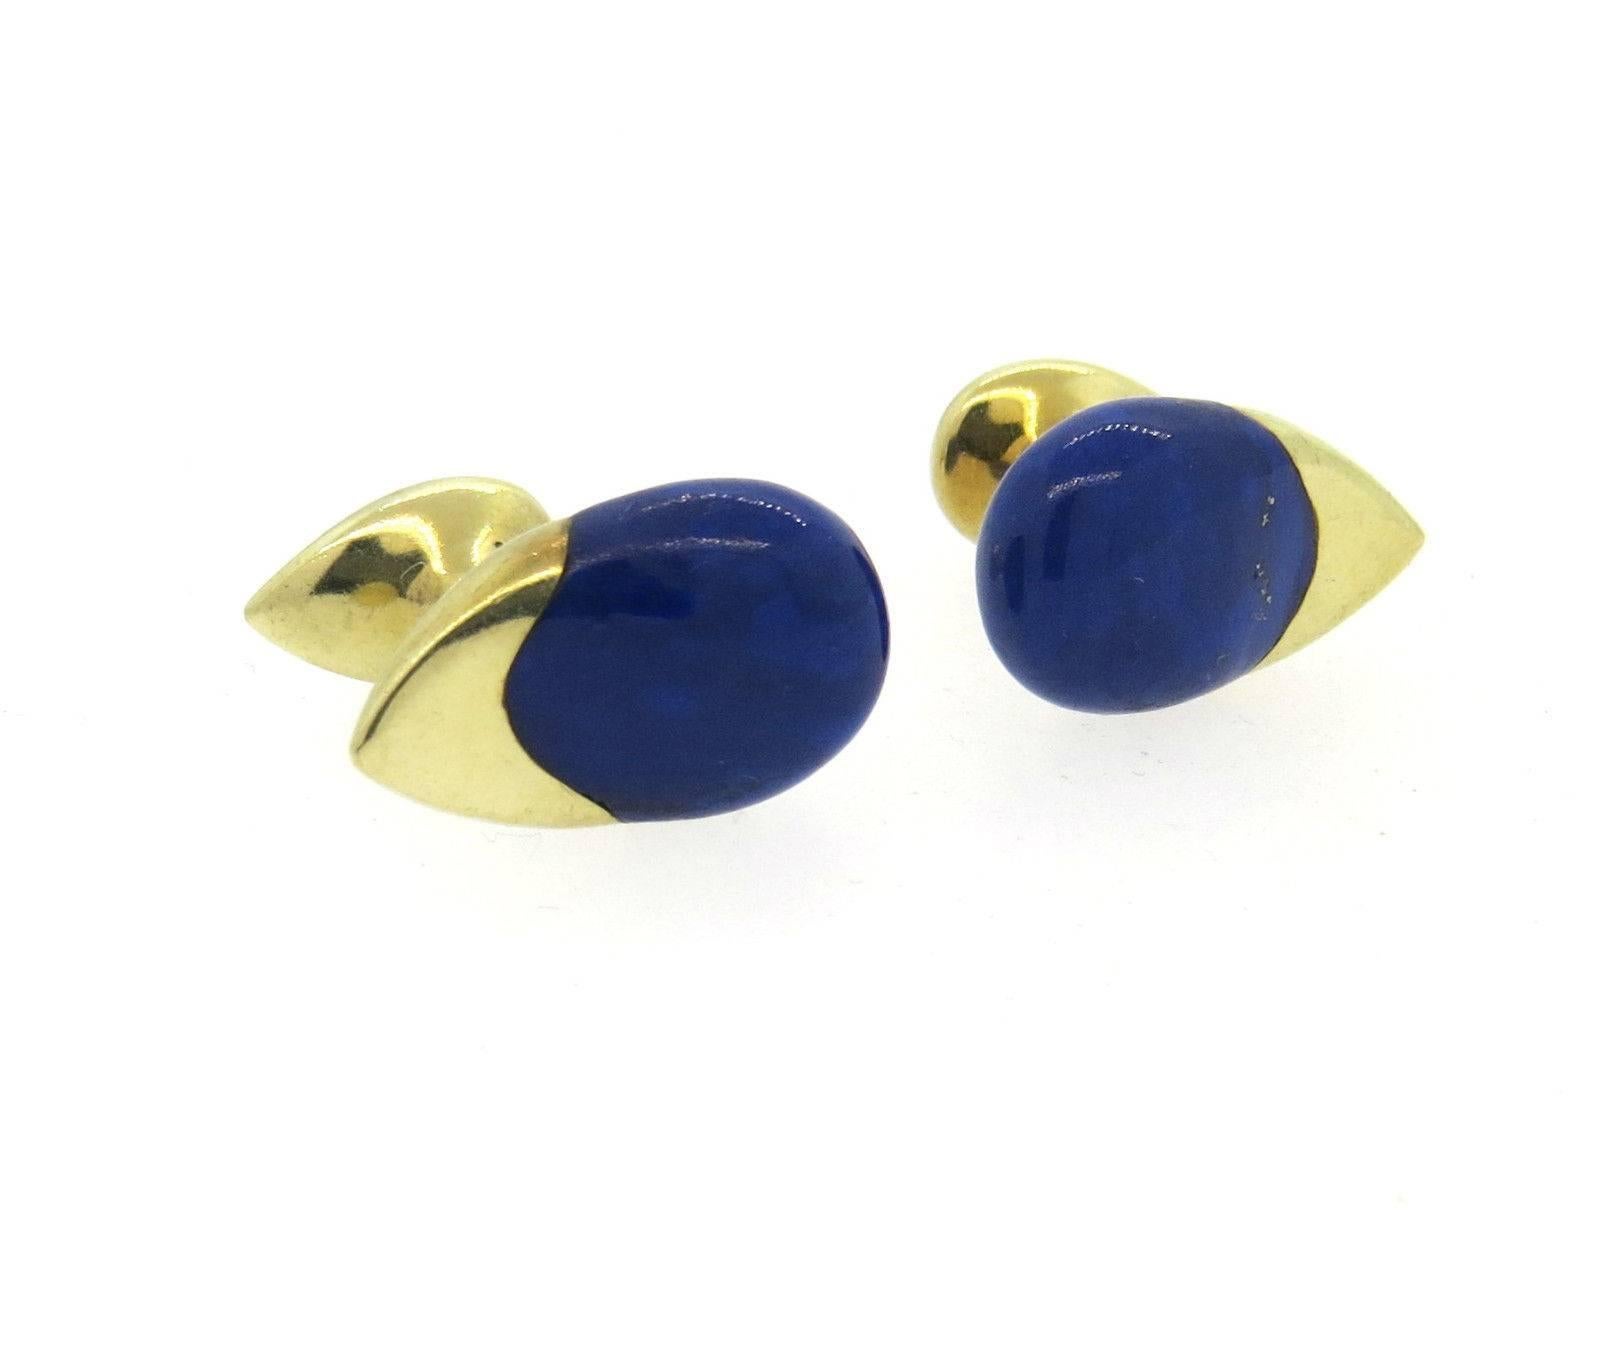 A pair 14k yellow gold cufflinks set with a lapis inlay. Each top measures 21mm x 13mm.  Marked: 14k, 585.  The weight of the cufflinks is 13.3 grams.